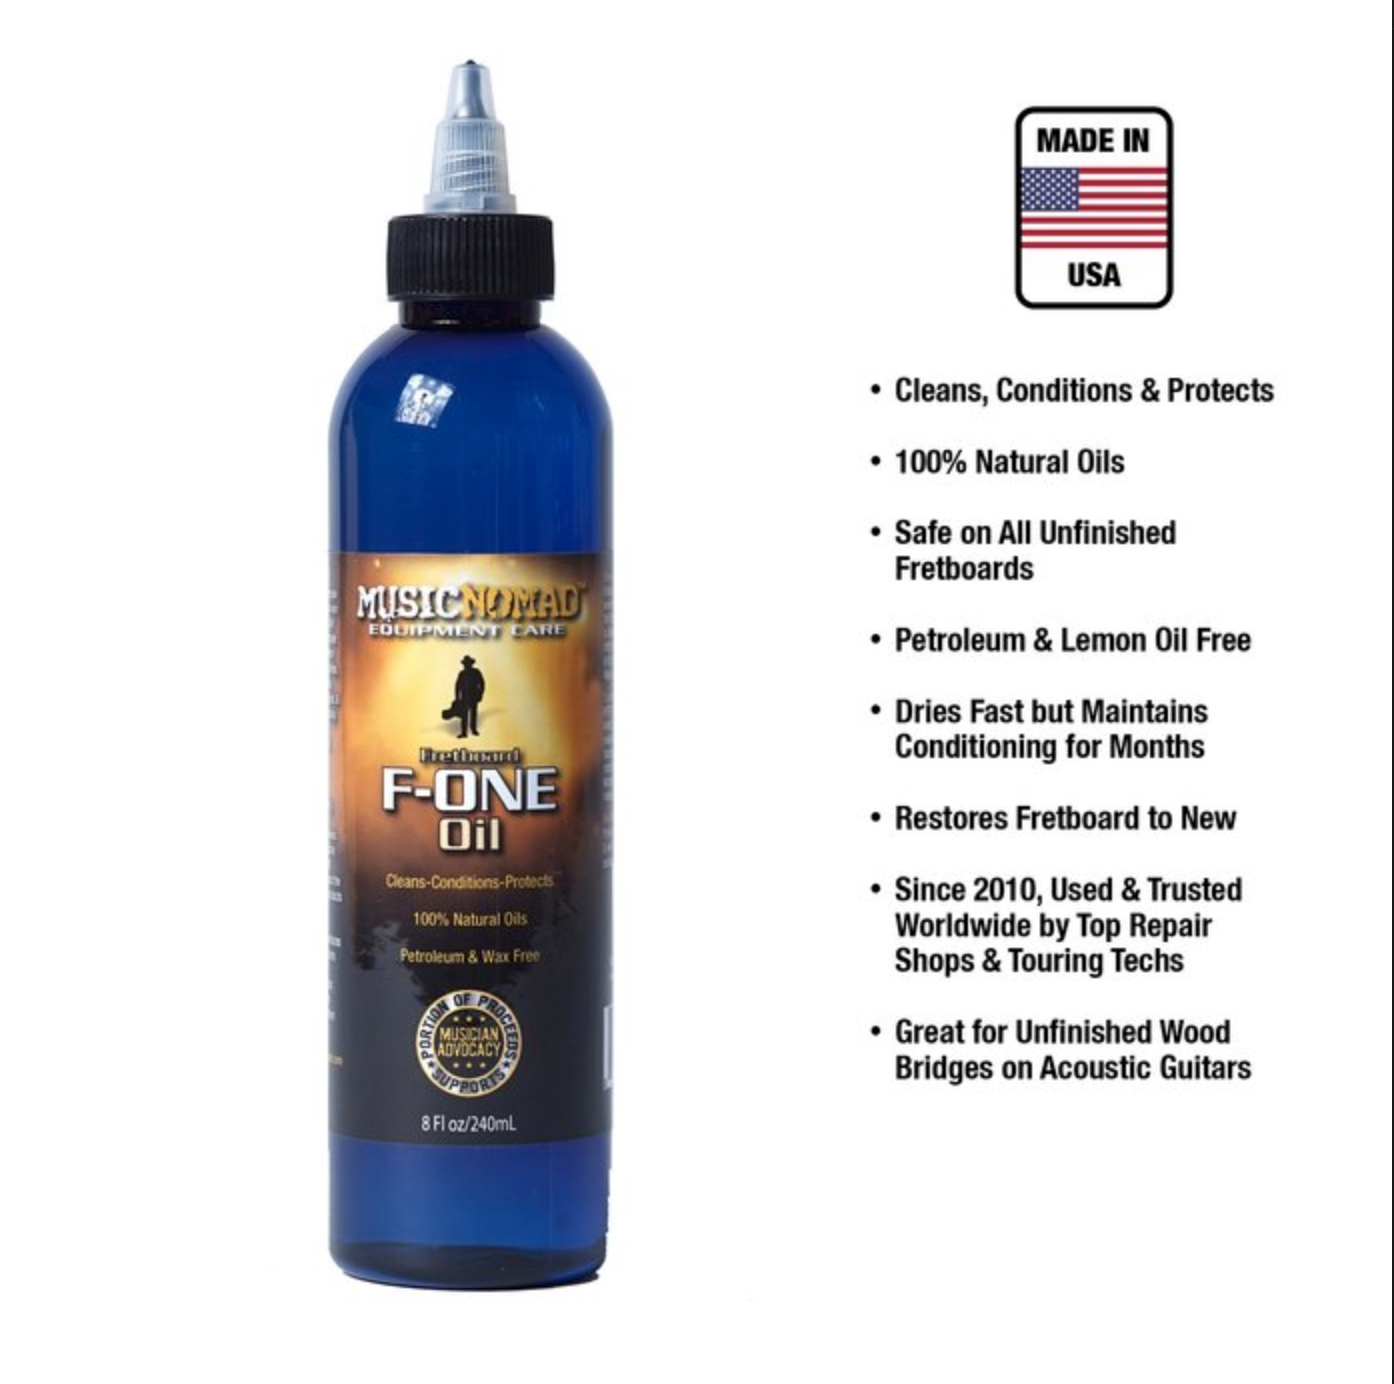 Fretboard F-ONE Oil - Cleaner & Conditioner - 8 oz S/N: MN151